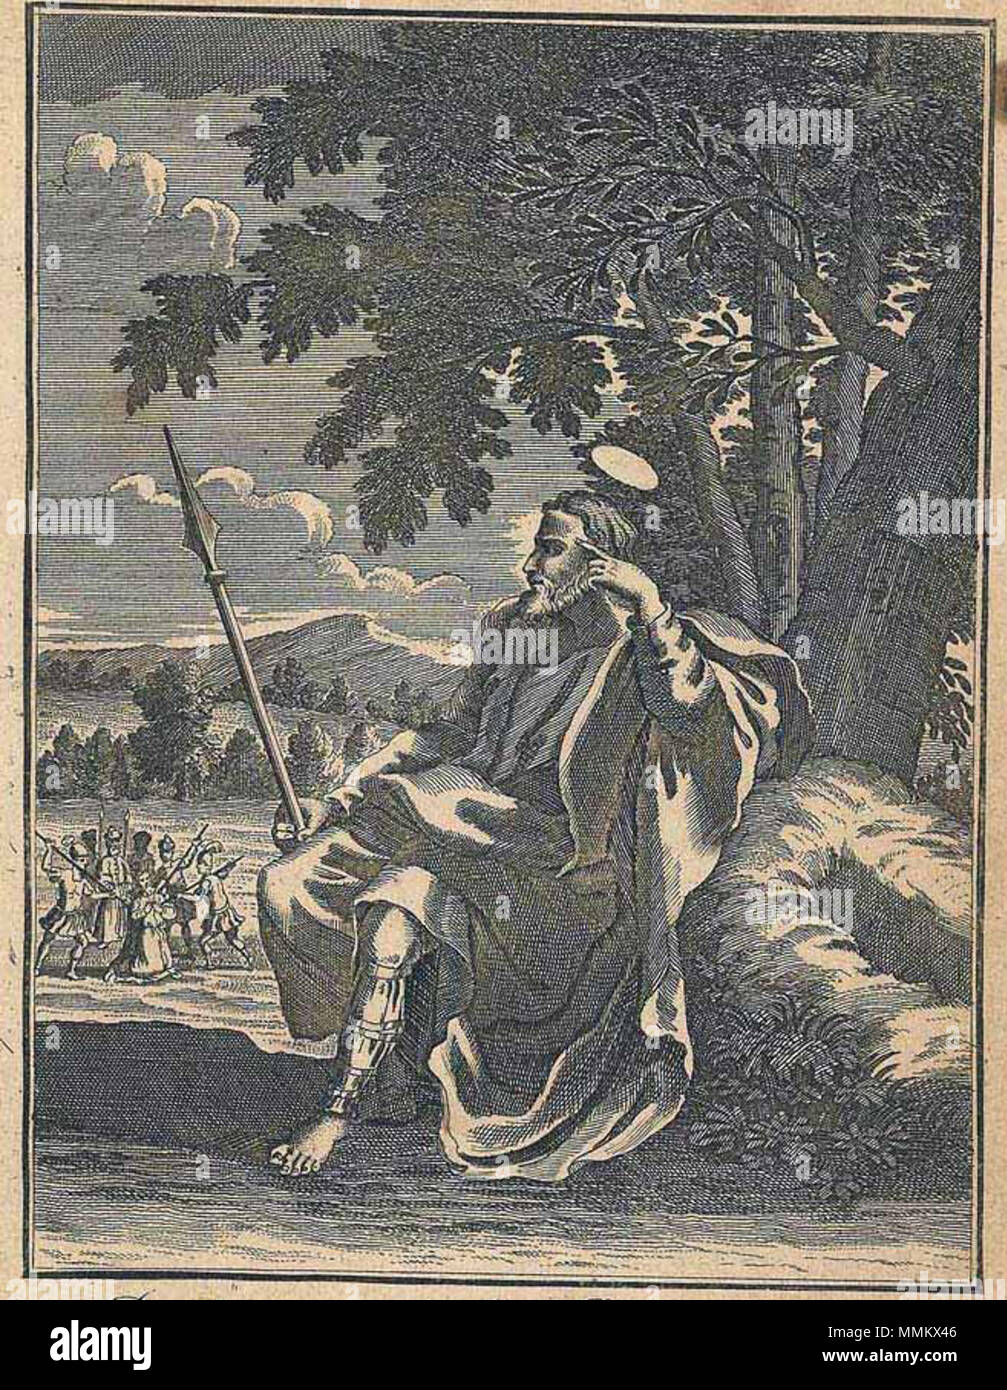 . English: 'By the command of an Indian King he was thrust through with Lances' (1739) Source: ebay, Nov. 2004 'A copper-plate engraving from 1739 on a light, handmade paper. From the Compleat History of the Holy Bible by Laurence Clarke, A.M. Published in London, for the author. From the Apocrypha and the New Testament.'  . 1739. Laurence Clarke By the command of an Indian King he was thrust through with Lances Stock Photo